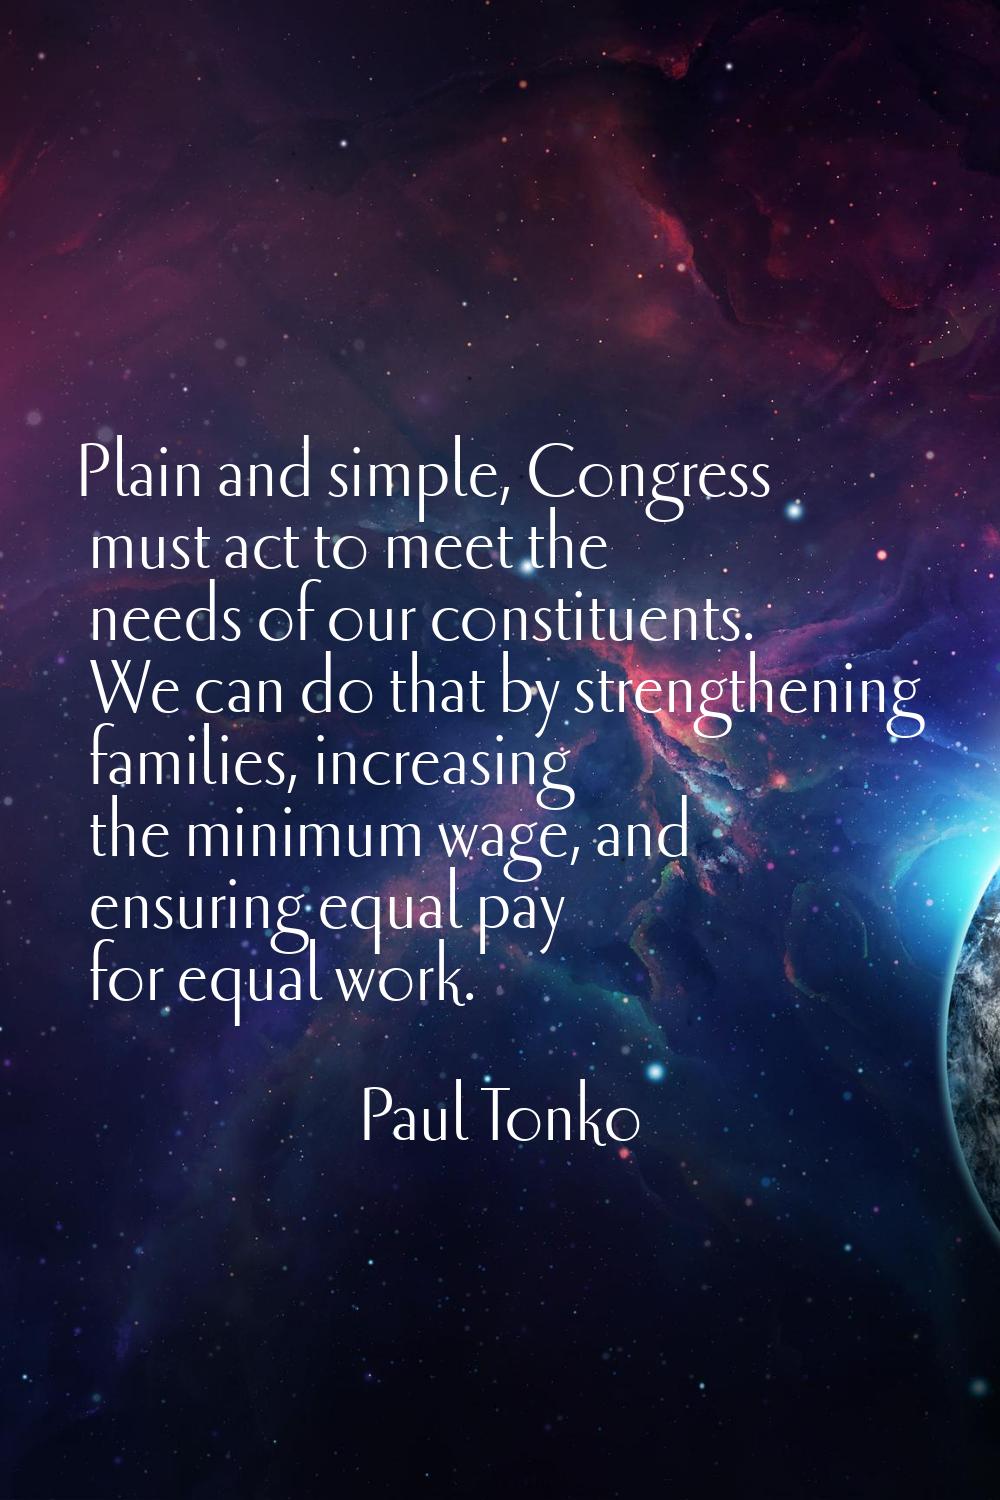 Plain and simple, Congress must act to meet the needs of our constituents. We can do that by streng